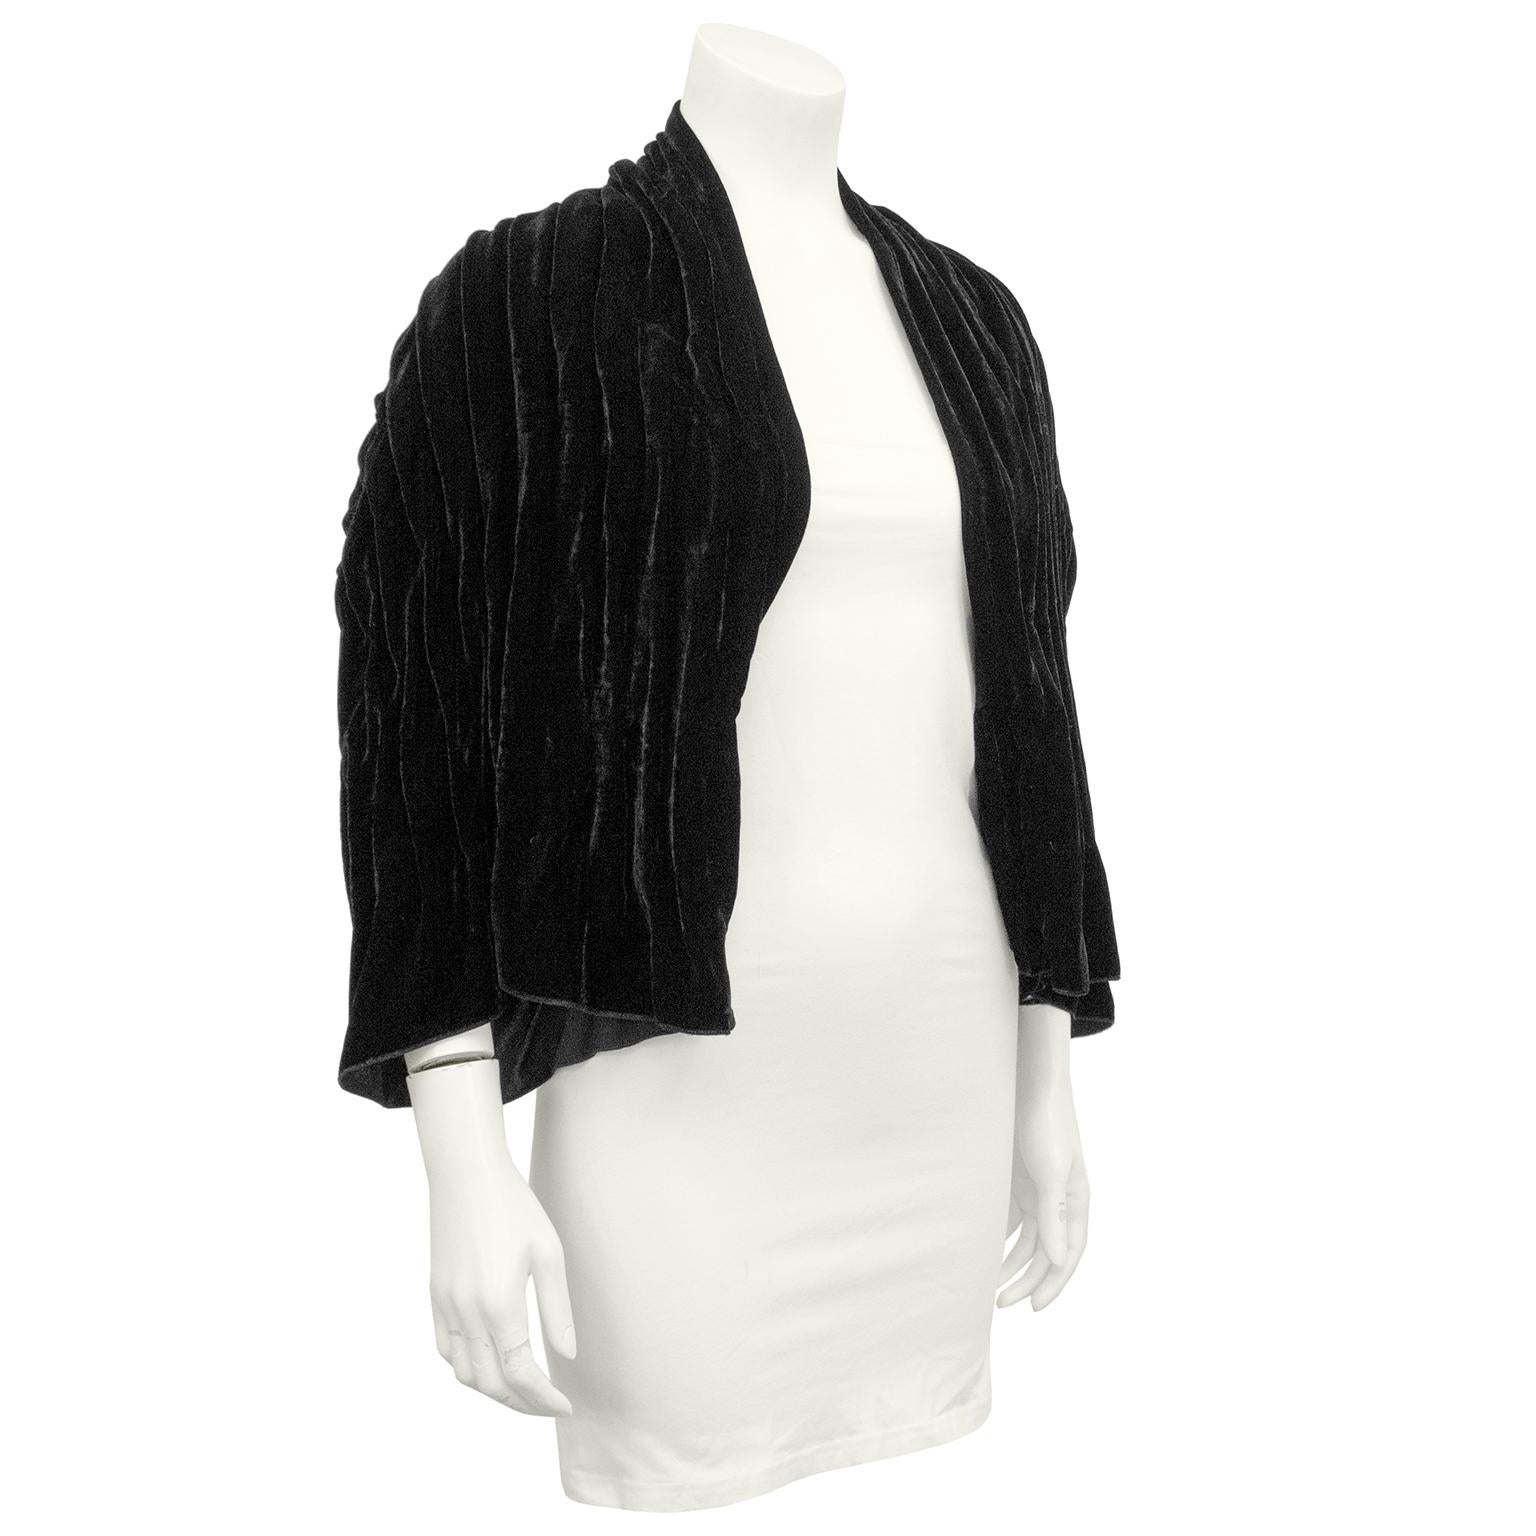 1990s Giorgio Armani black velvet bolero shrug. Designed to be worn open. Bracelet length sleeves. Velvet is folded and pleated vertically in the front and horizontally in the back. The pleating adds beautiful texture and allows light to hit the